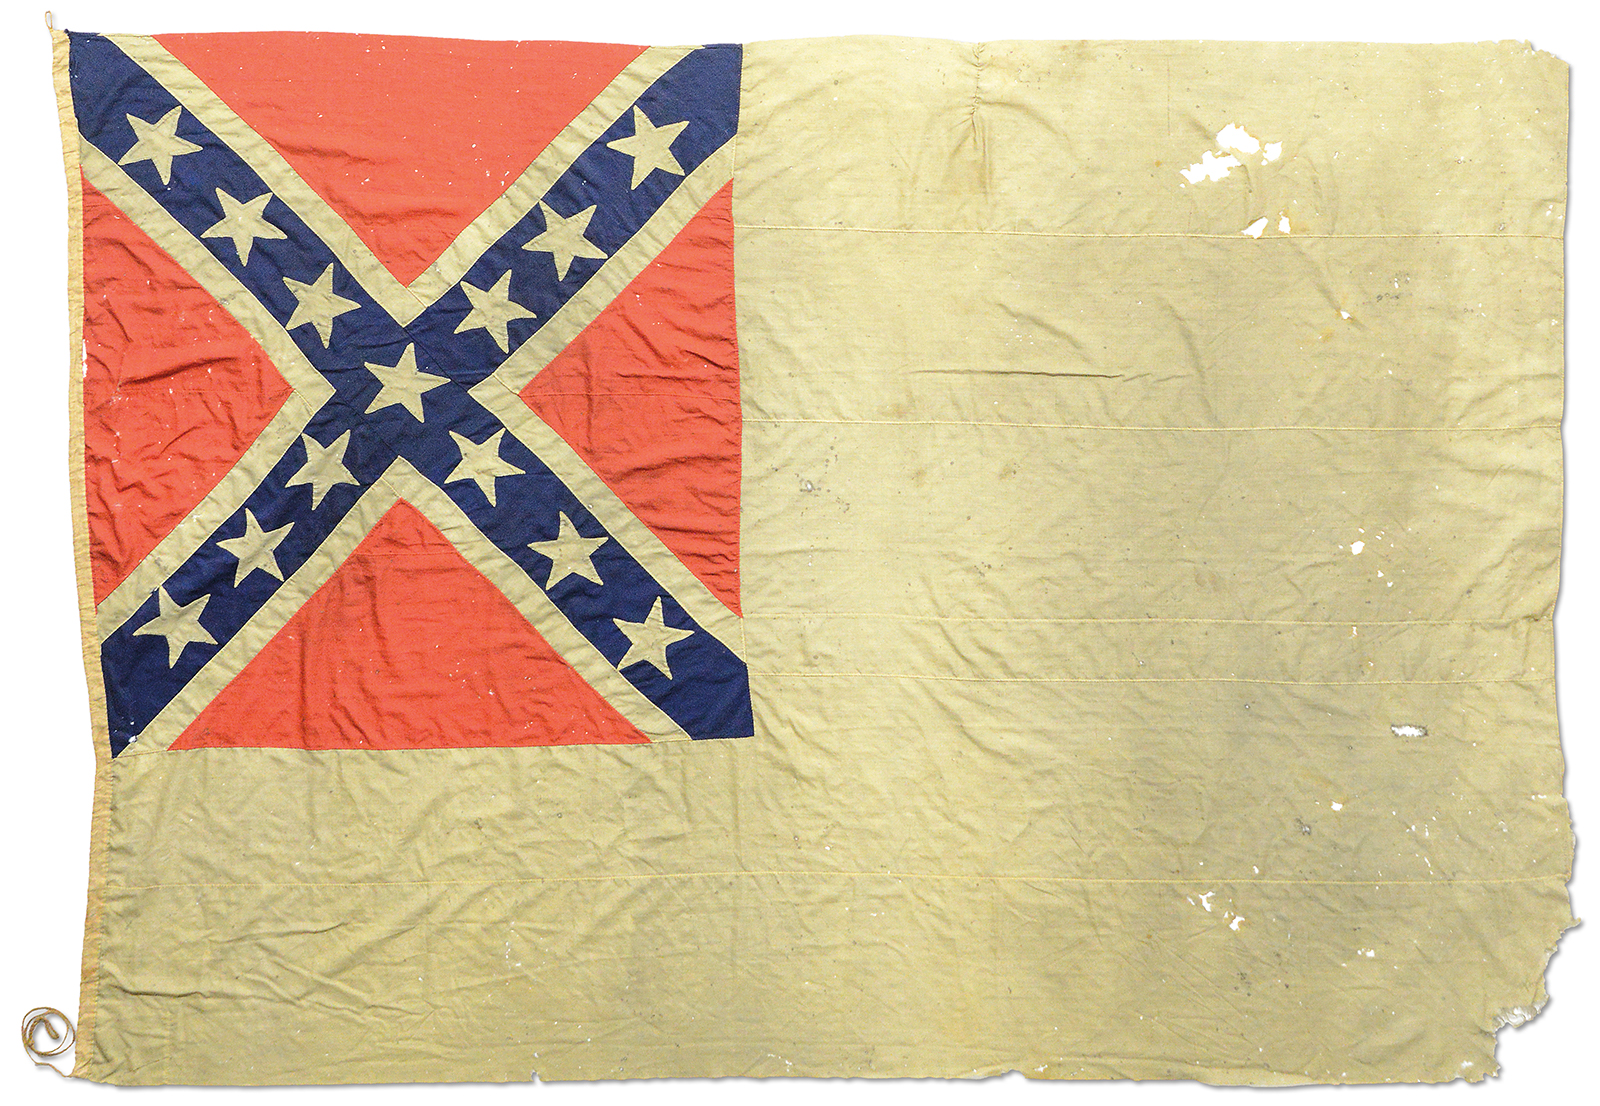 FINE AND HISTORIC CONFEDERATE 2ND NATIONAL NAVAL FLAG CAPTURED BY THE 121ST NEW YORK INFANTRY DURING THE CIVIL WAR.